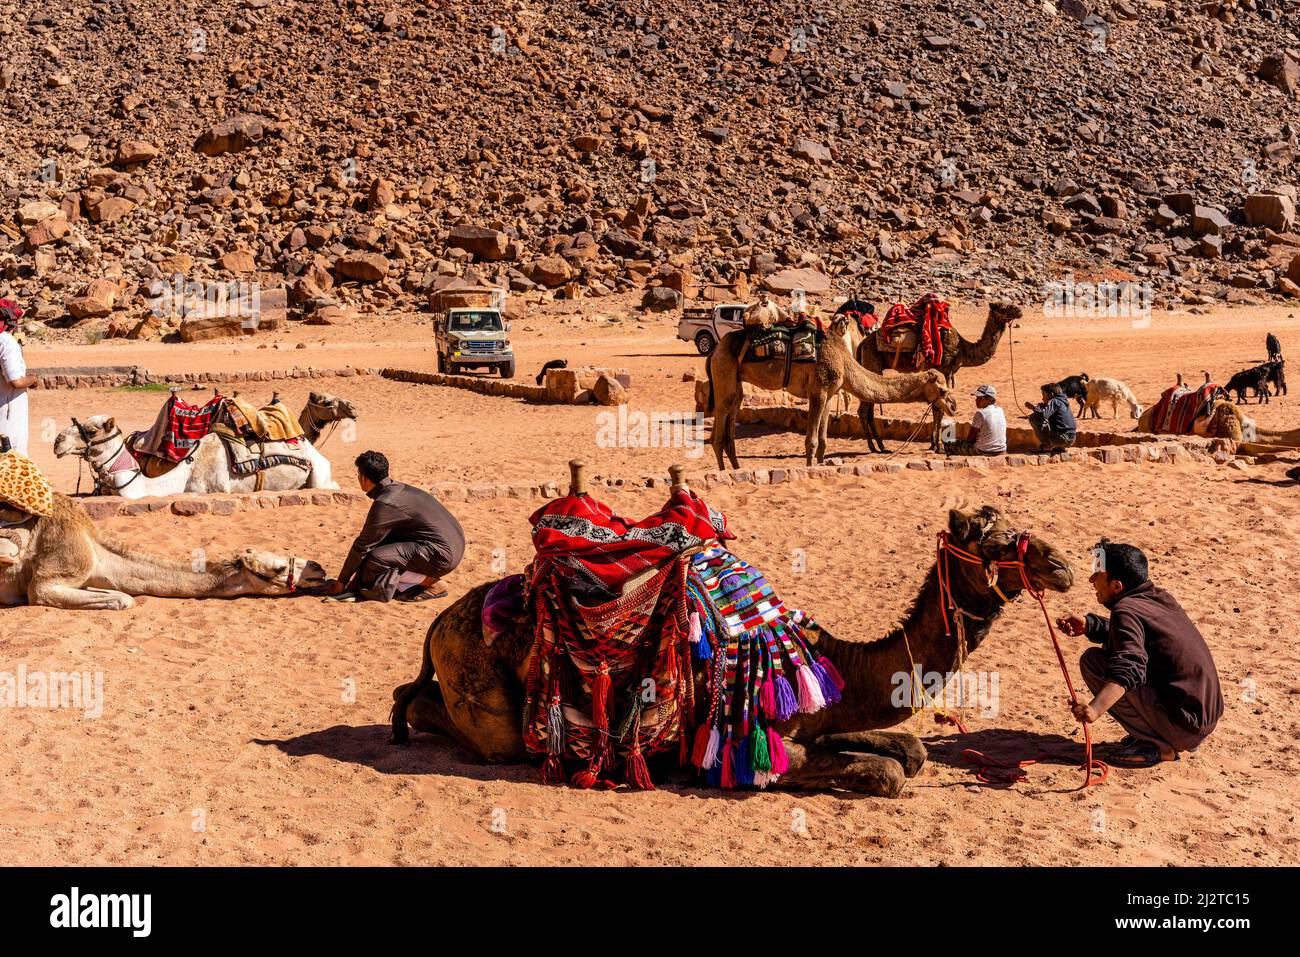 Local Bedouins With Their Camels Wait For Tourists At Lawrence.’s Spring, Wadi Rum, Jordan. Stock Photo